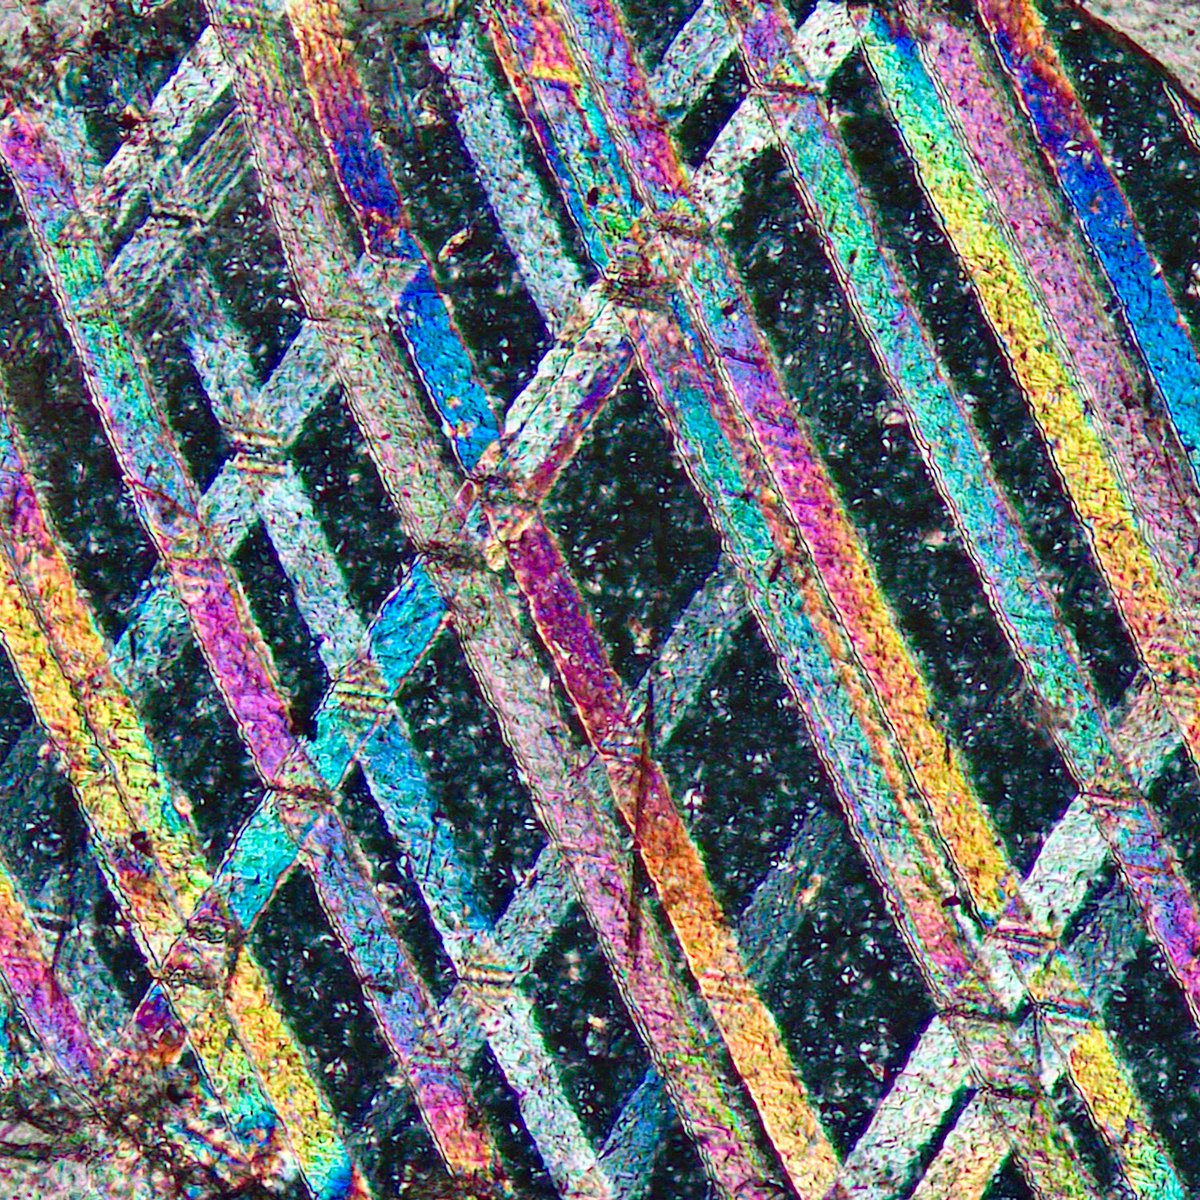 Just ended the lecture on the metamorphism of carbonate rocks!
Here a colorful twinned calcite in a marble from Lasa (south Tyrol, Italy)
Enjoy!

#science #Art #sciart #scicomm #minerals #crystals #rocks #lines #colors #wallart #marble #geology